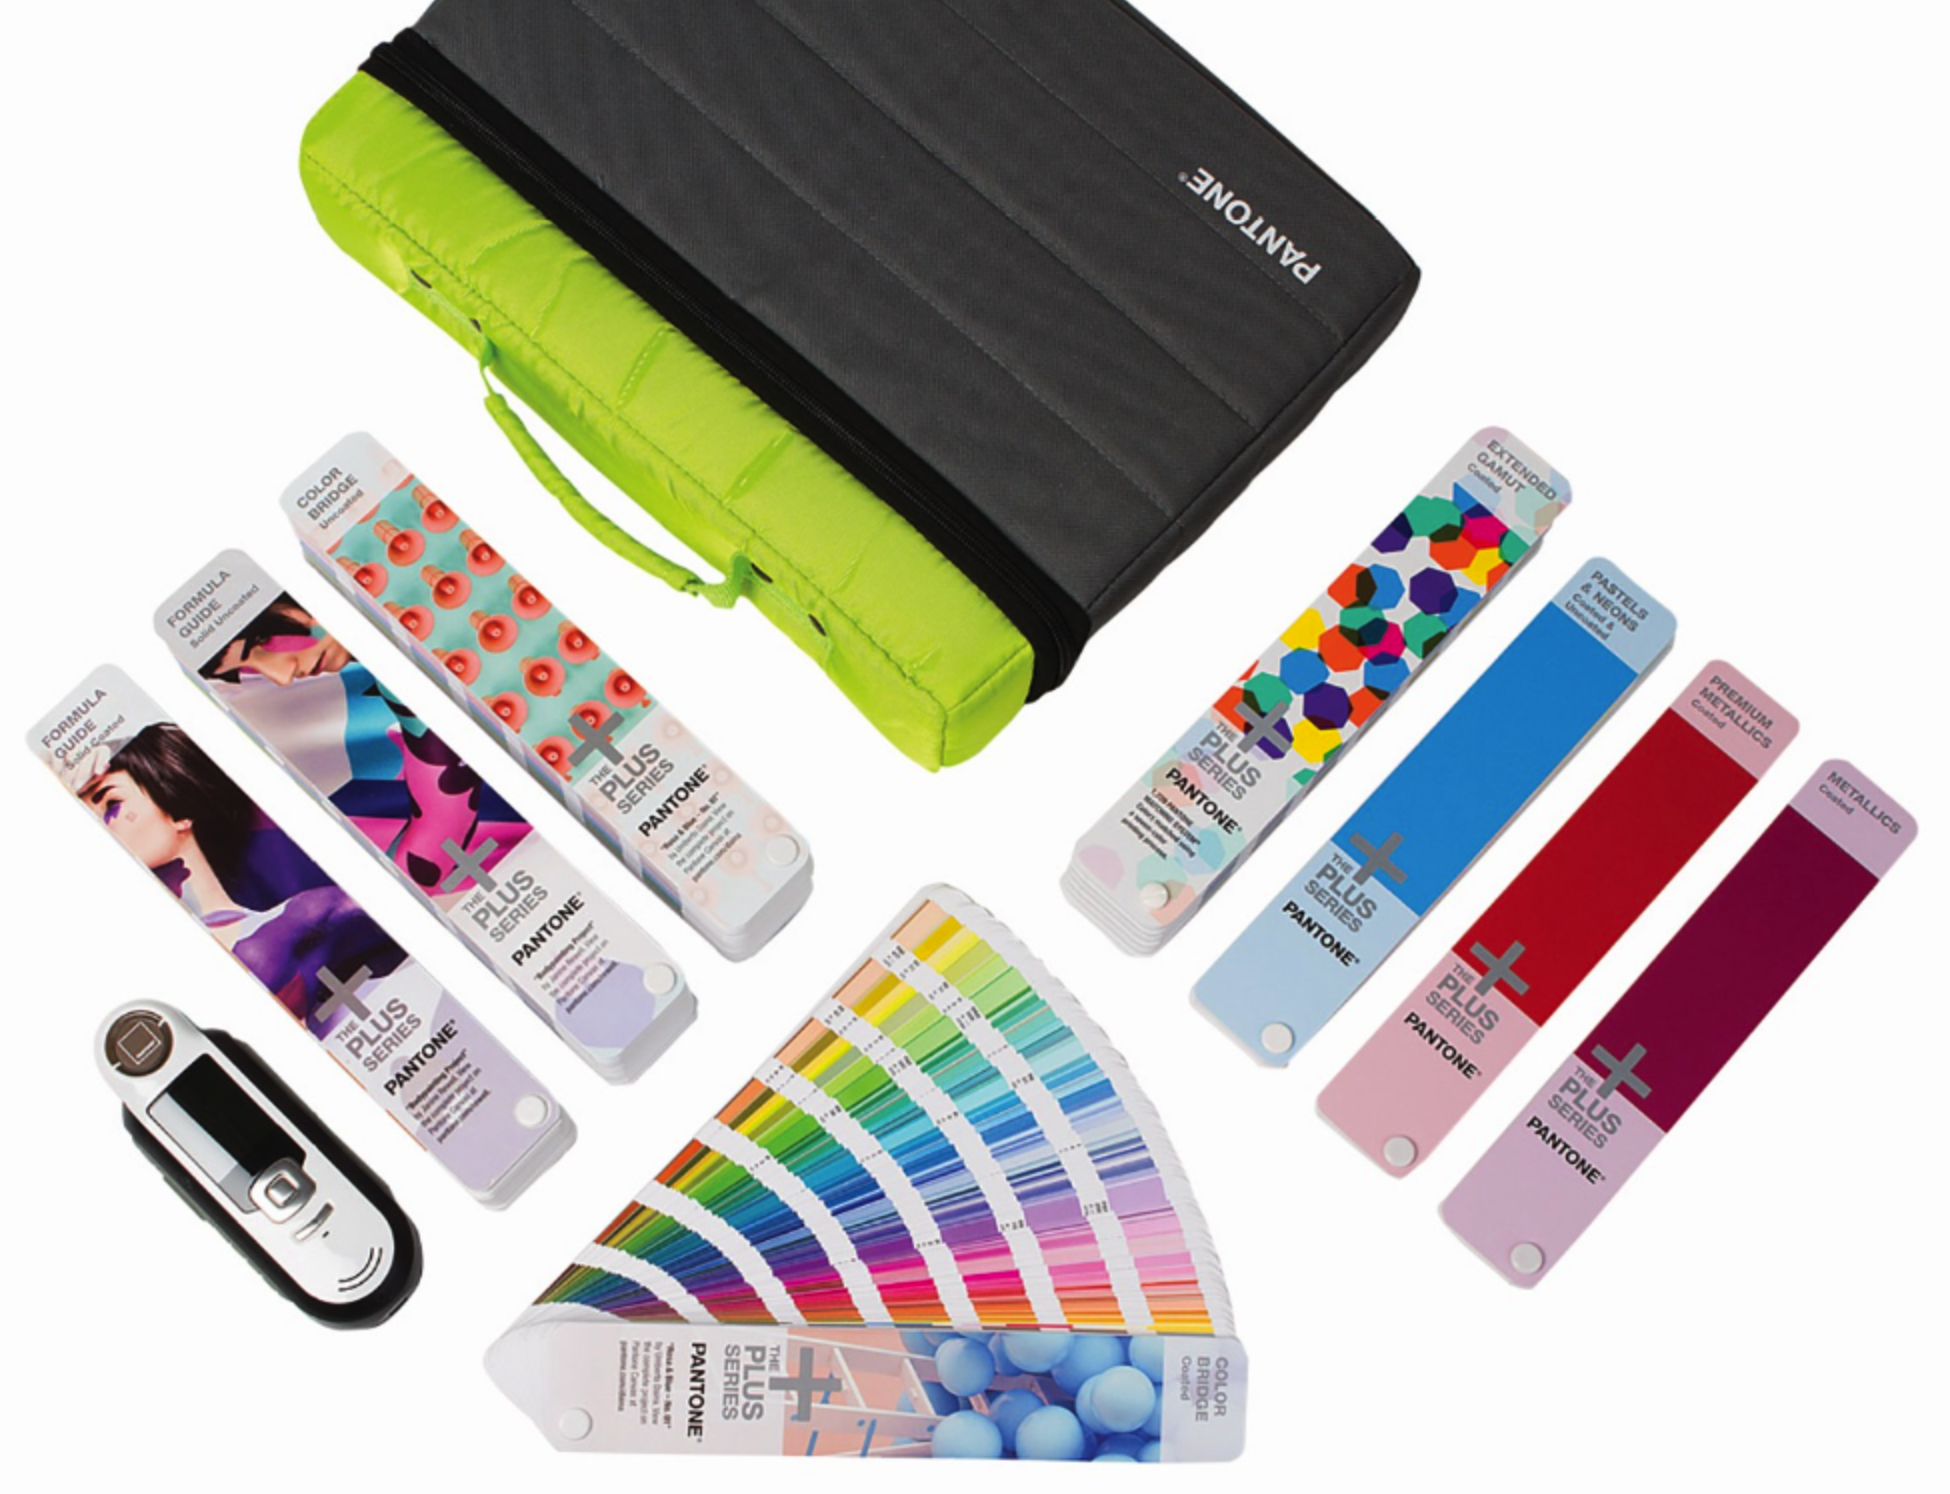 The new PANTONE MASTER COLLECTION for Graphic Designers includes 10,000 PANTONE Colors for instant matching.